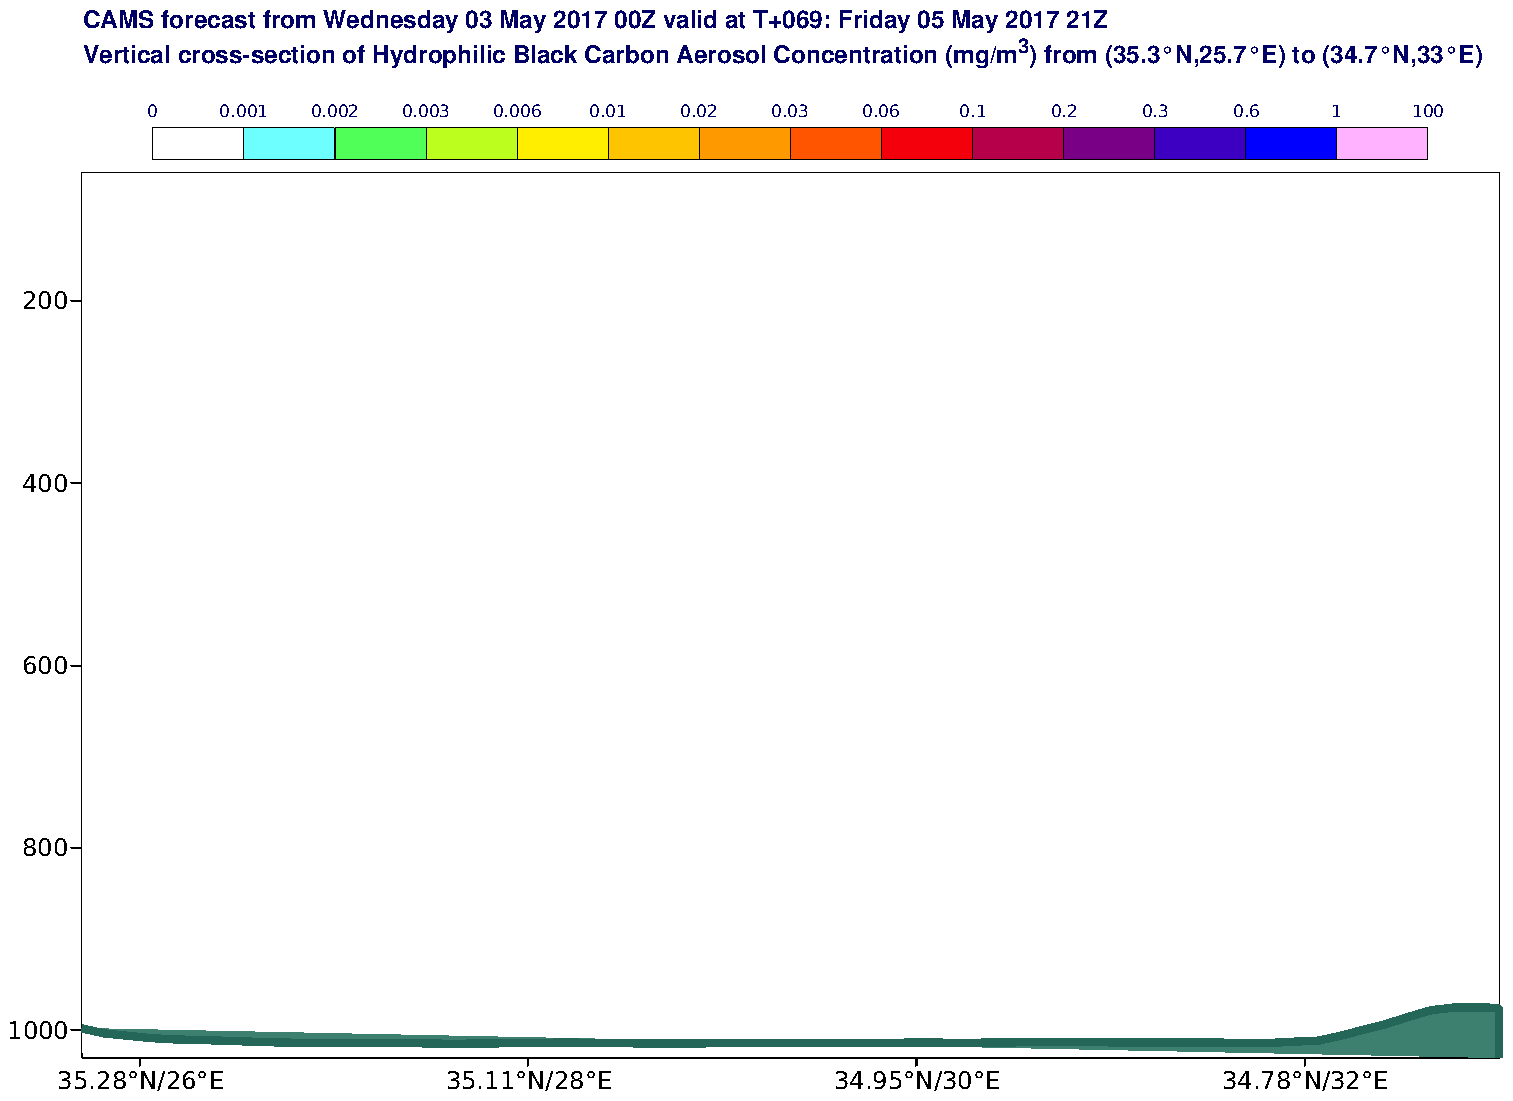 Vertical cross-section of Hydrophilic Black Carbon Aerosol Concentration (mg/m3) valid at T69 - 2017-05-05 21:00